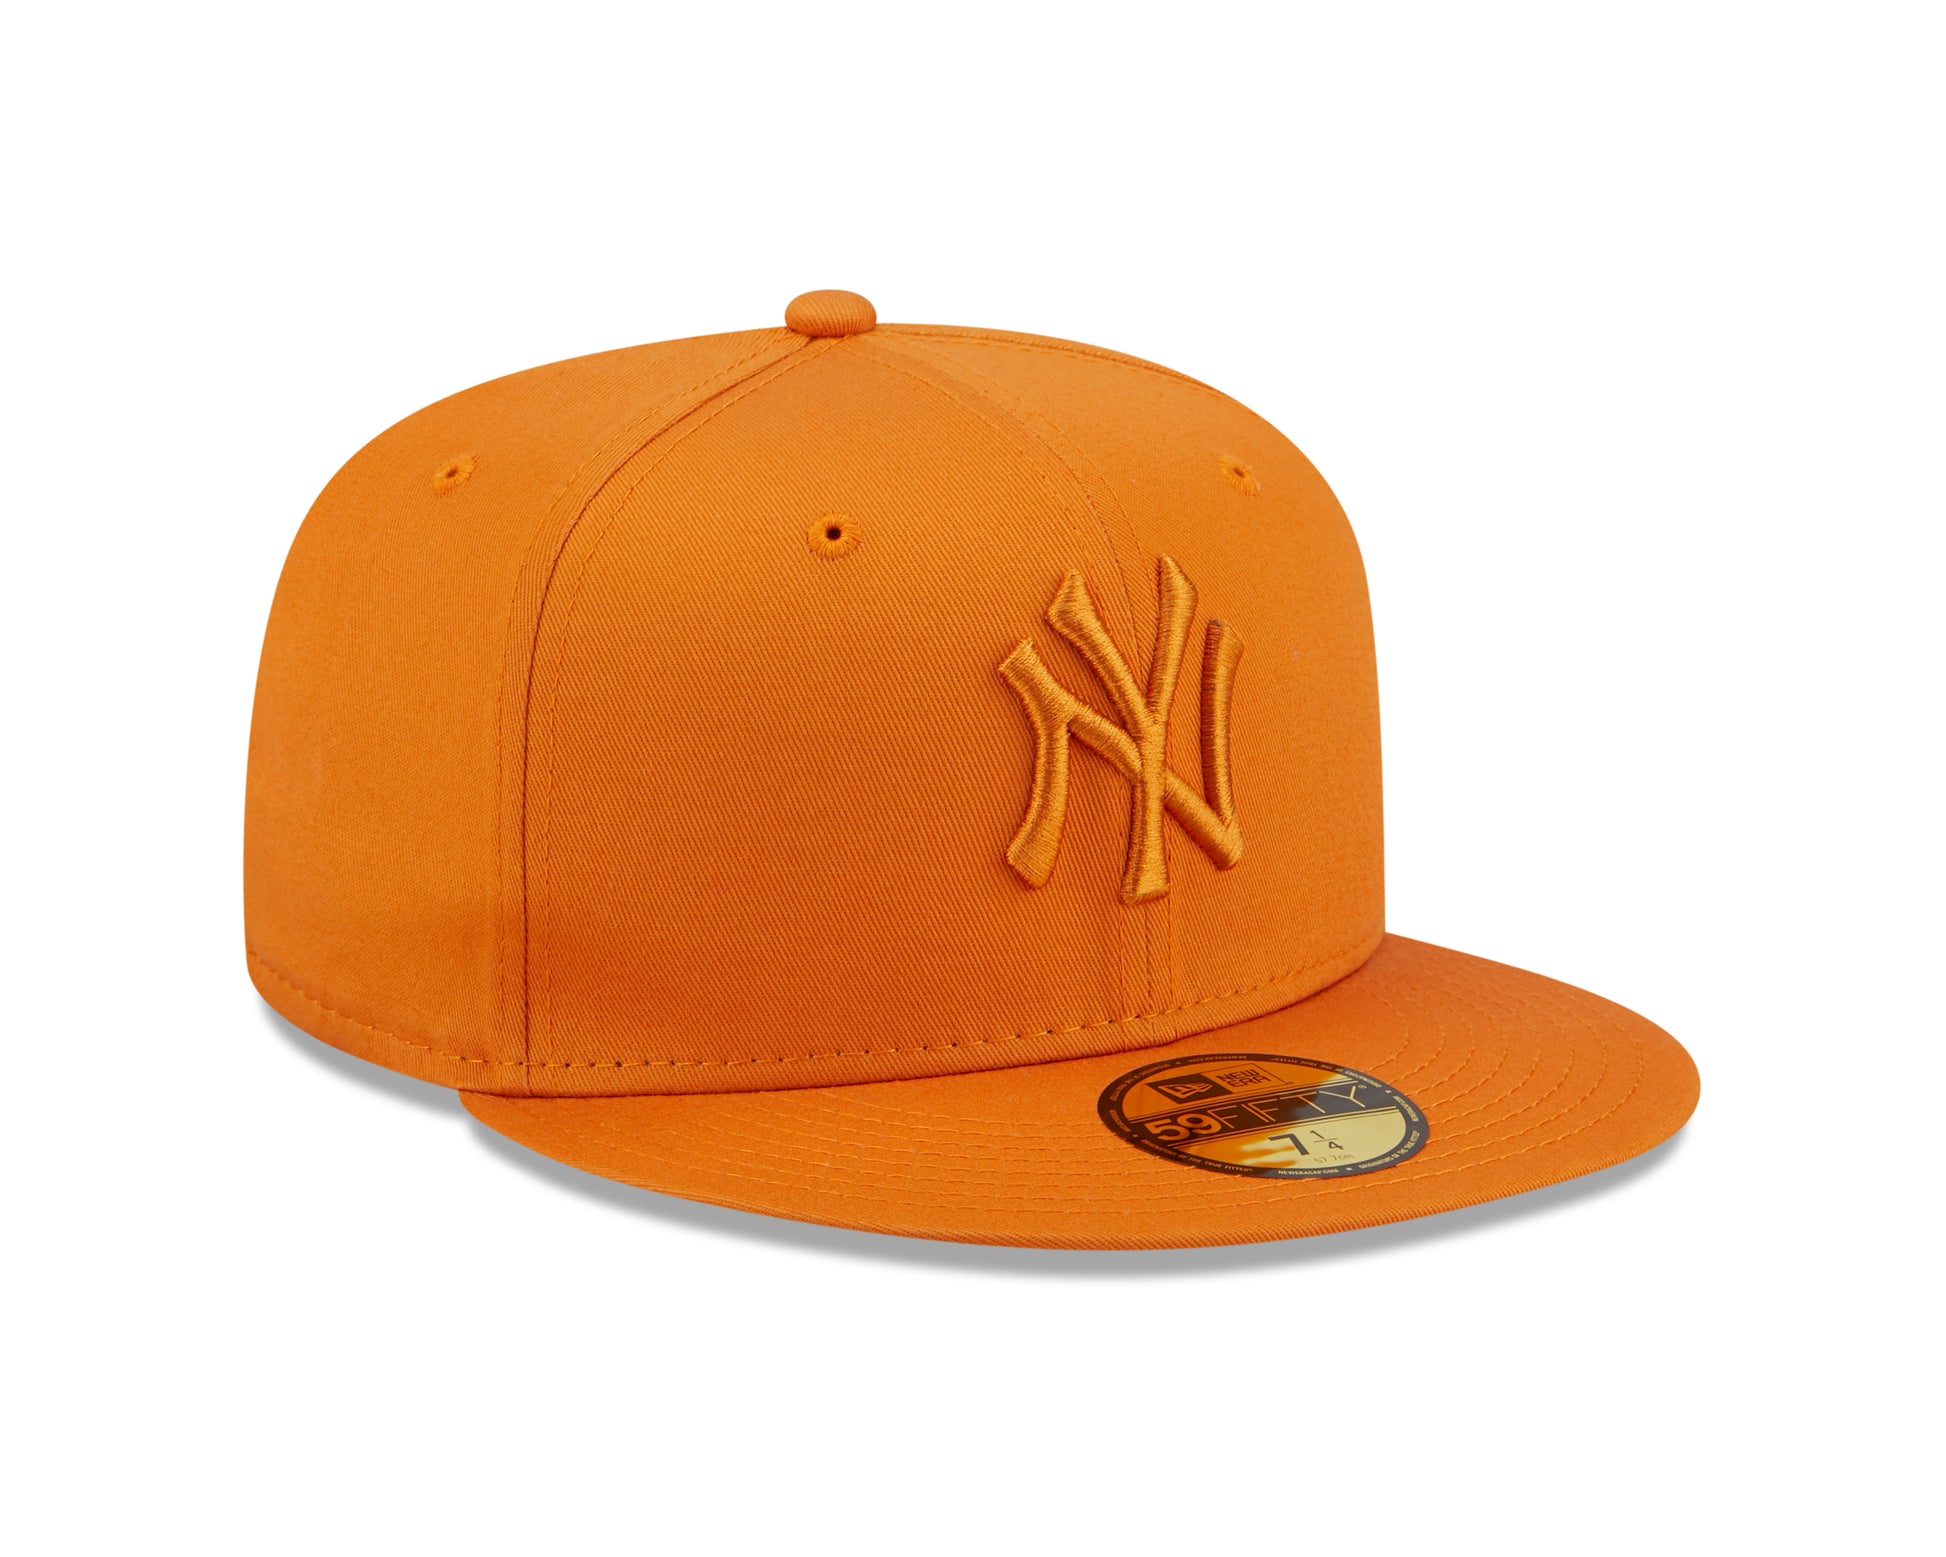 59Fifty Fitted Cap League Essential New York Yankees - Orange Tonal - Headz Up 